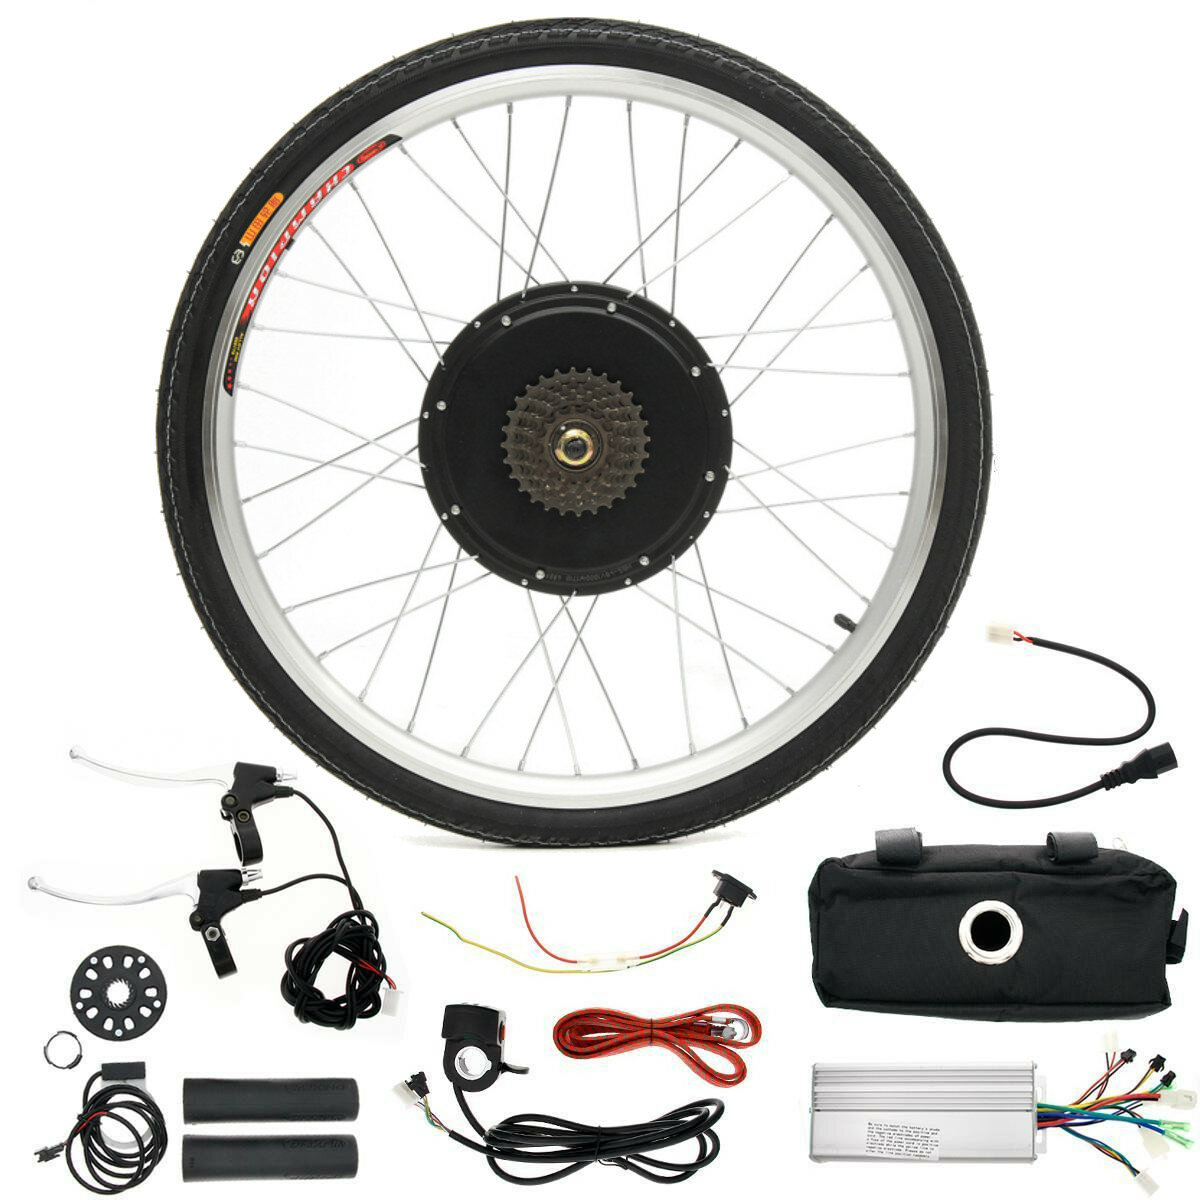 LCD + 36V/48V 1000W 26inch Hight Speed Scooter Electric Bicycle E-bike Hub Motor Conversion Kit